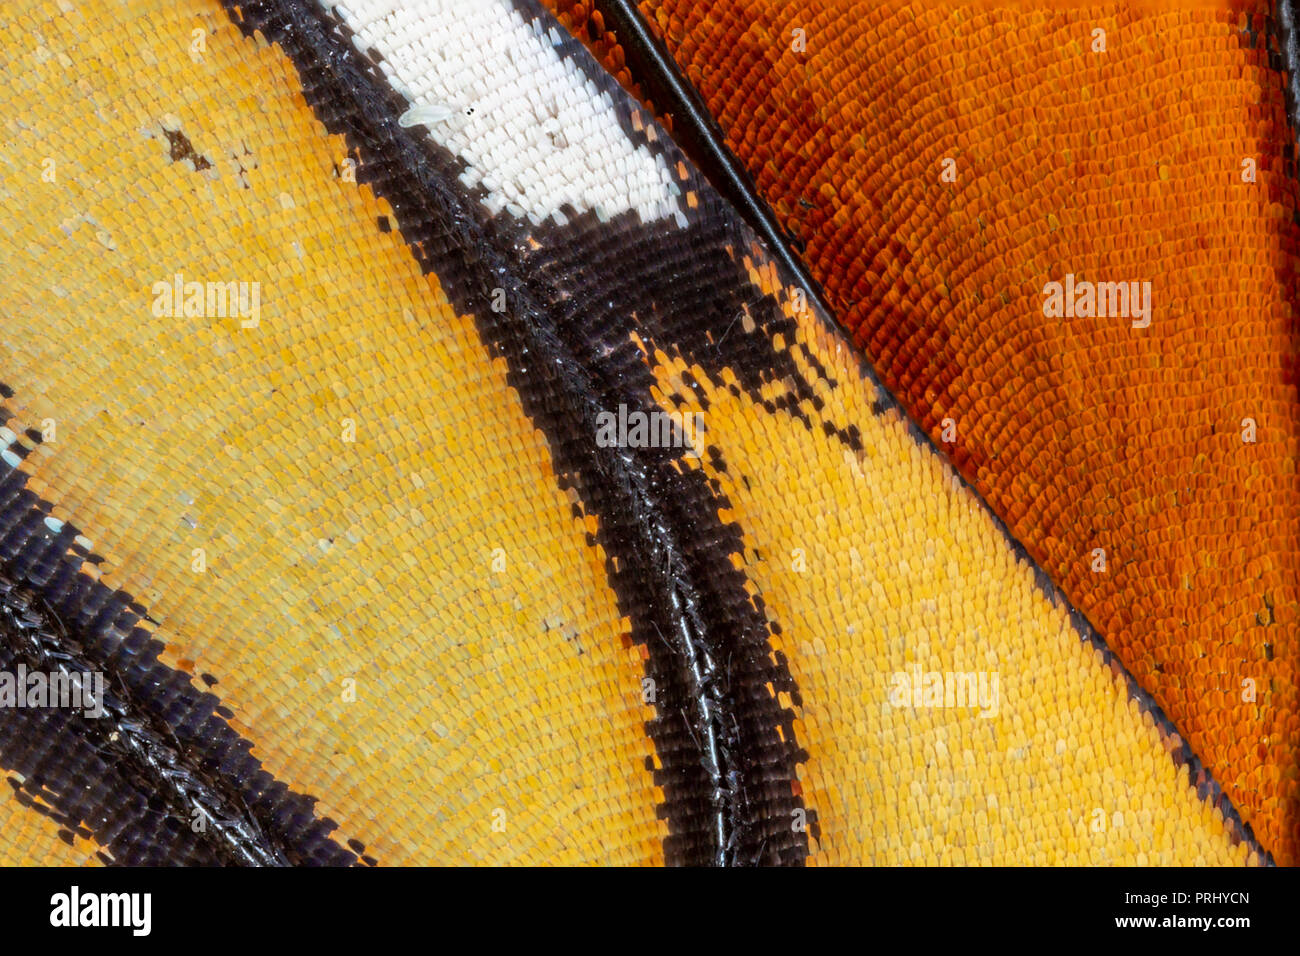 A closeup of the wing of a Monarch butterfly (Danaus plexippus) reveals the intricsate pattern of scales - Ontario, Canada Stock Photo